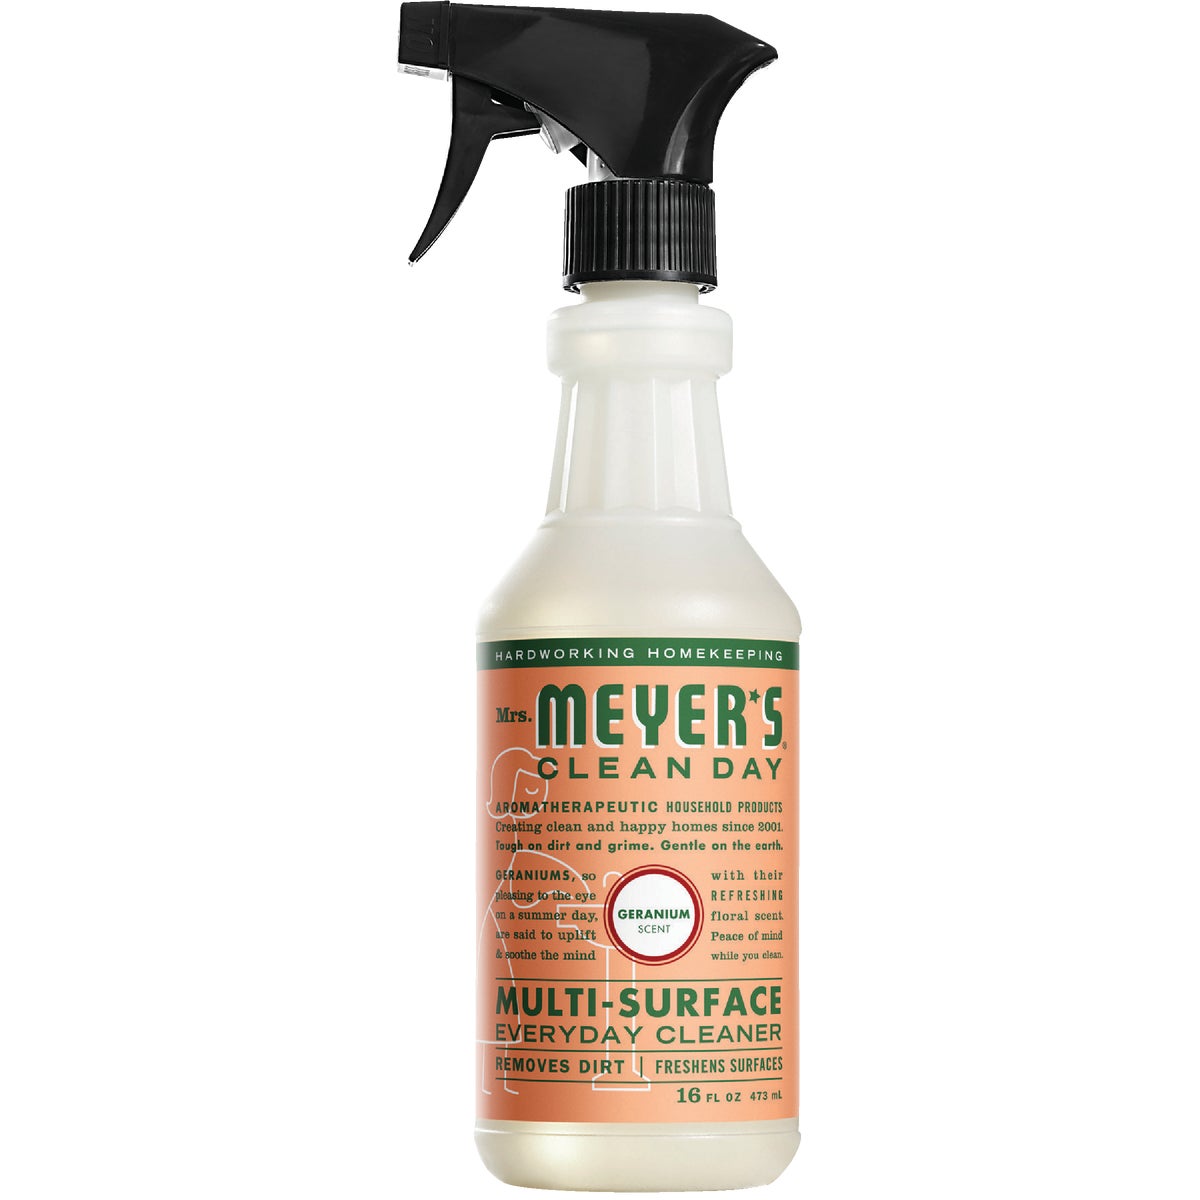 Mrs. Meyer's Clean Day 16 Oz. Geranium Multi-Surface Everyday Cleaner